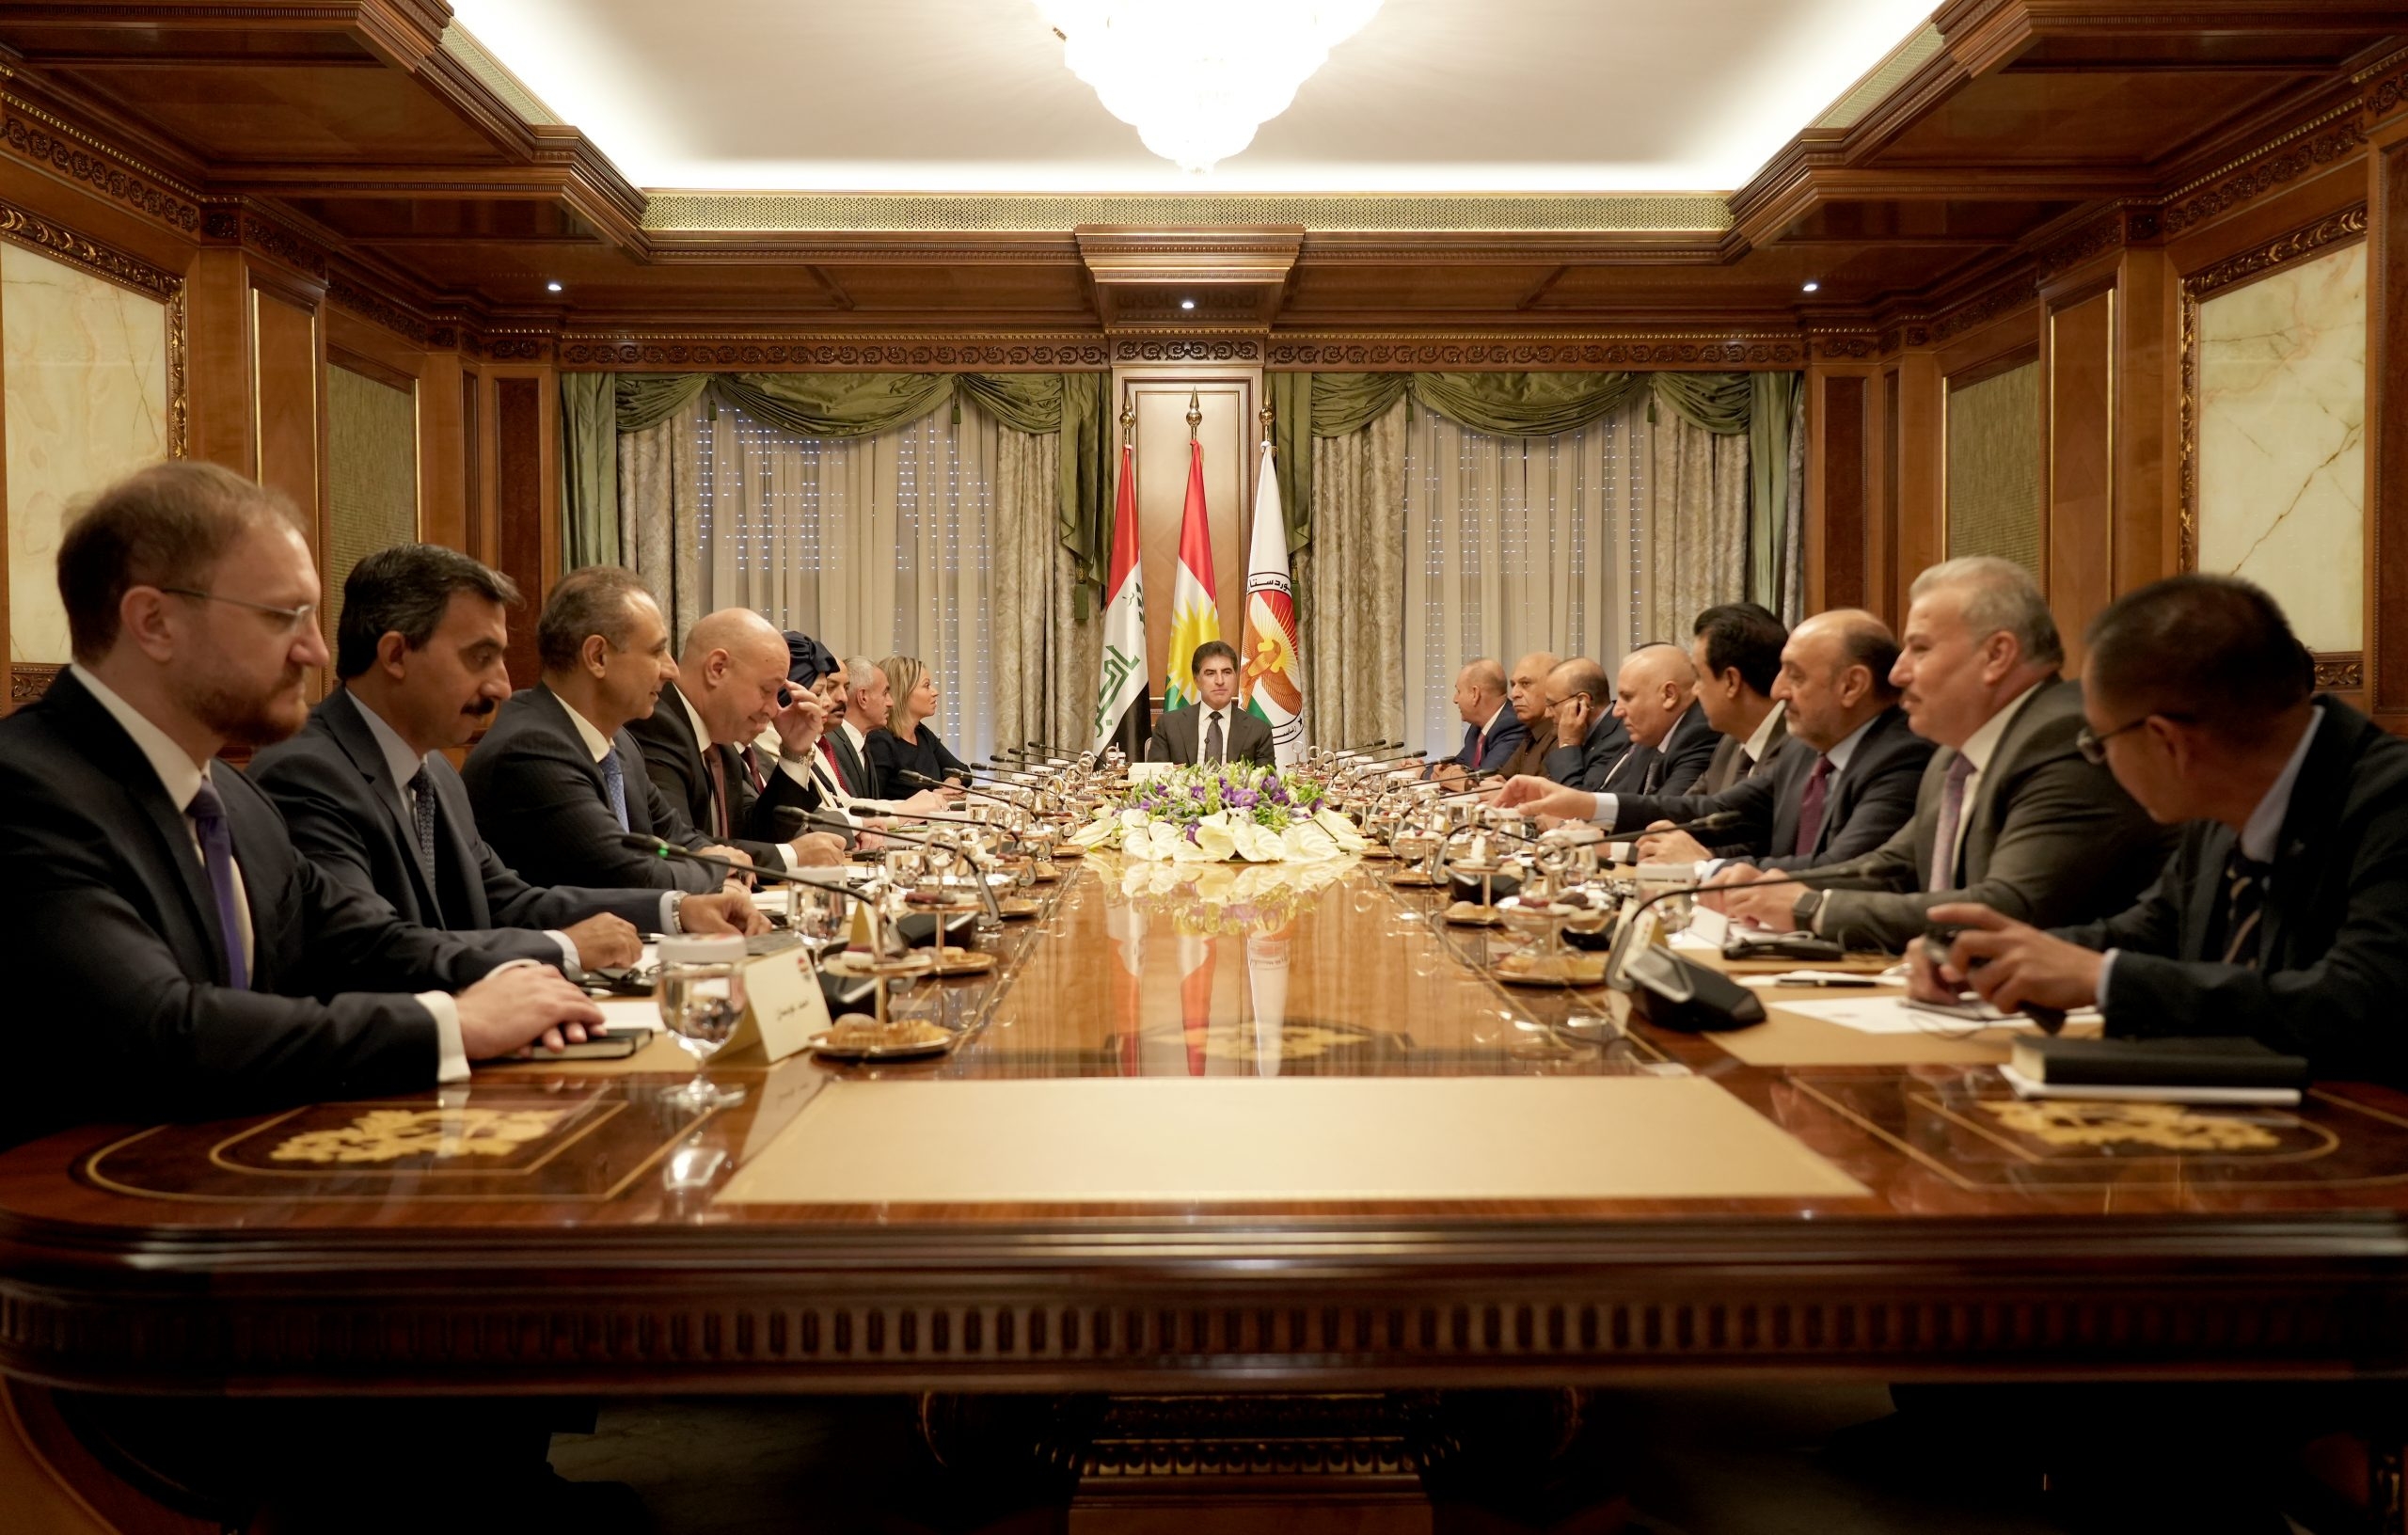 President Nechirvan Barzani meets with the Independent high Electoral Commission in Iraq (IHEC)